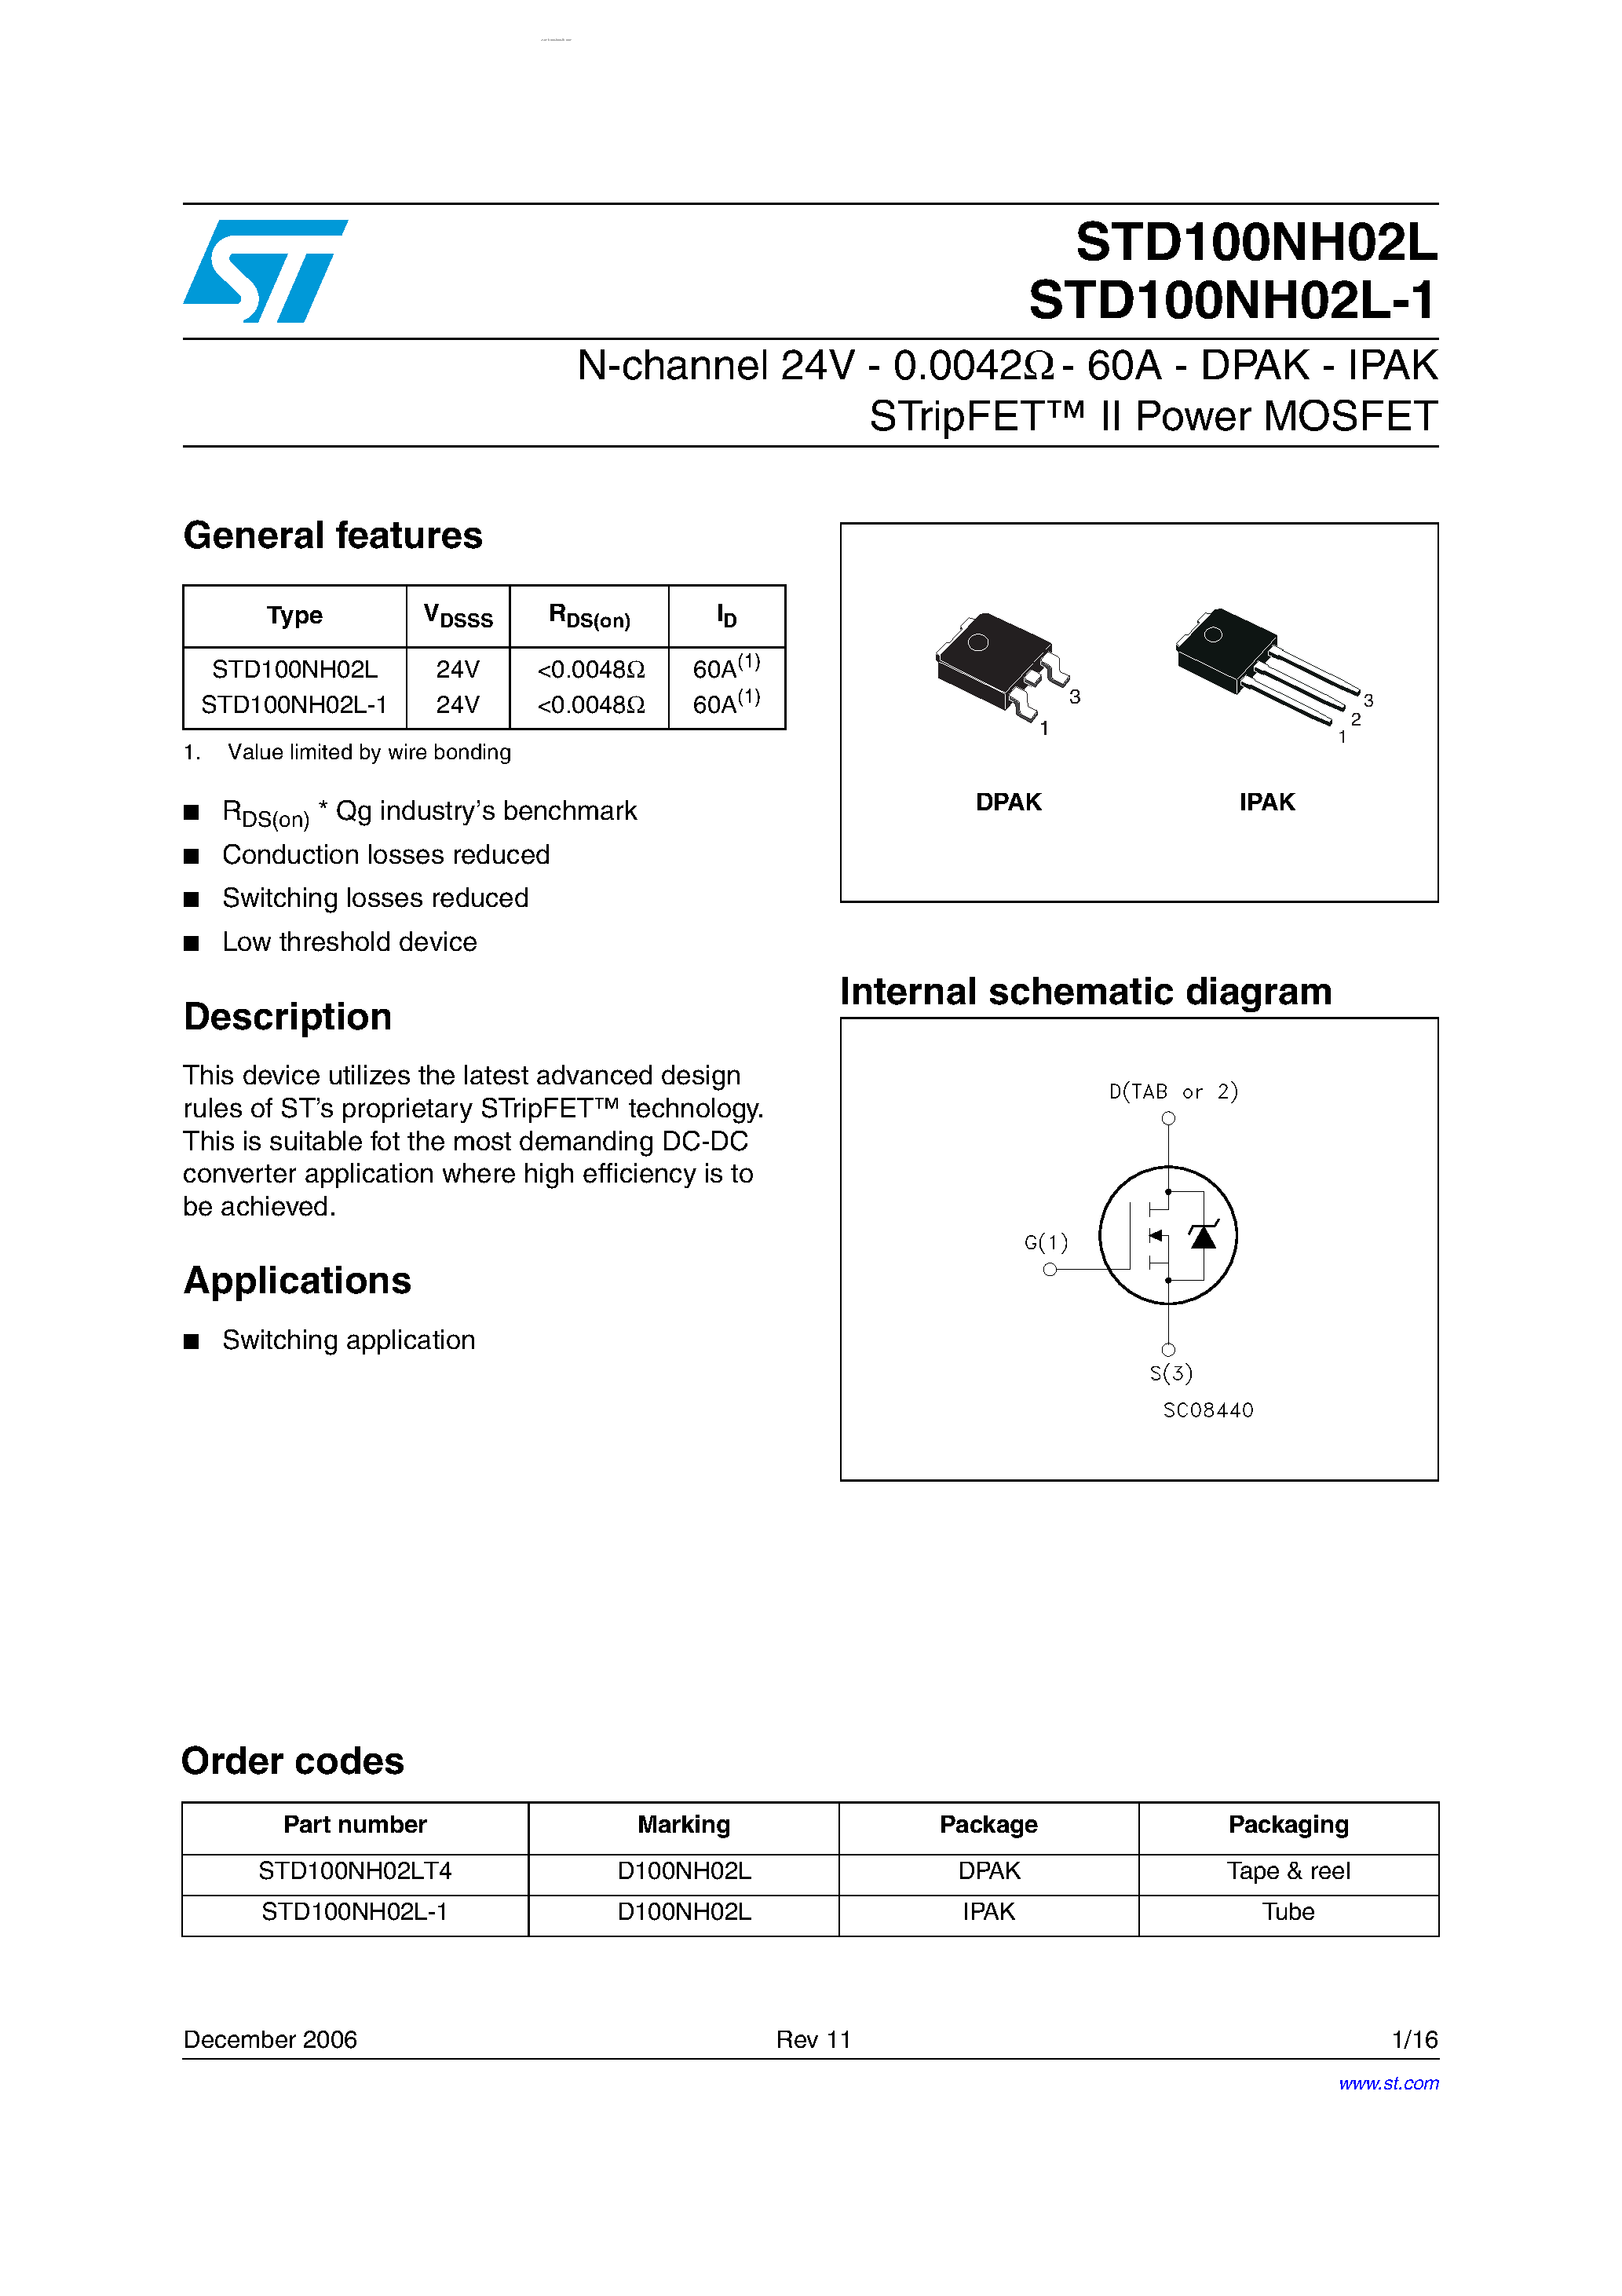 Datasheet STD100NH02L-1 - N-CHANNEL POWER MOSFET page 1